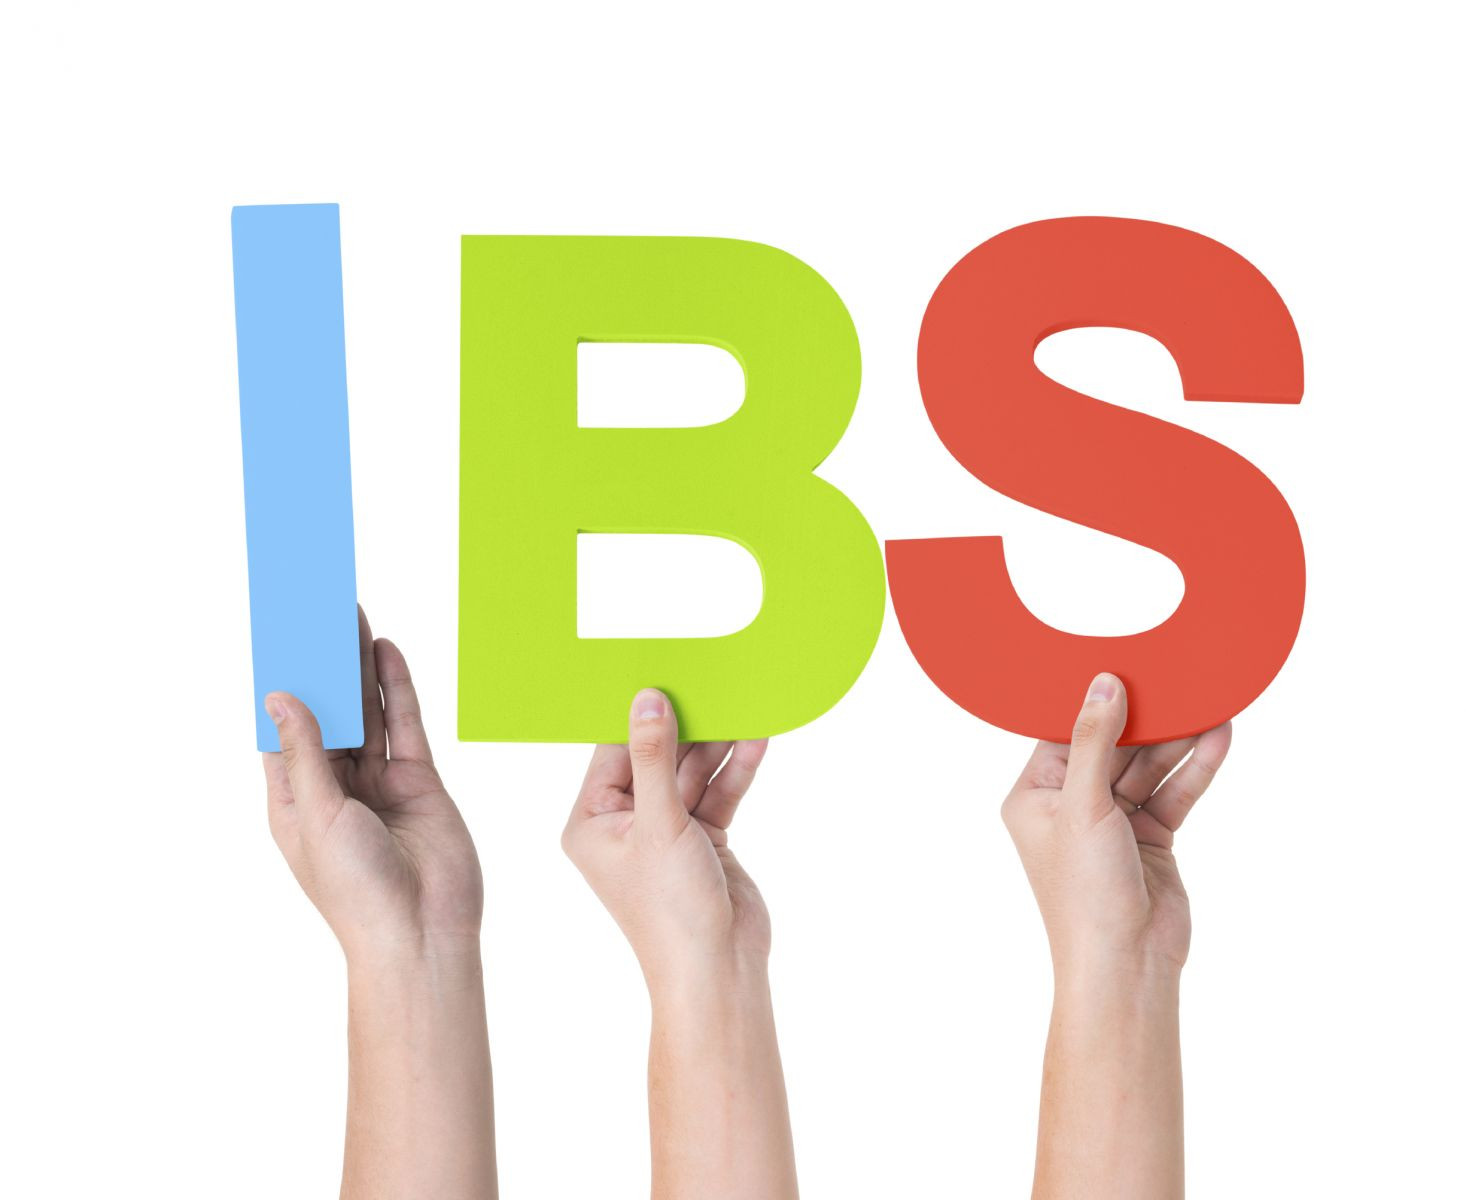 Three hands holding up letters to spell "IBS."